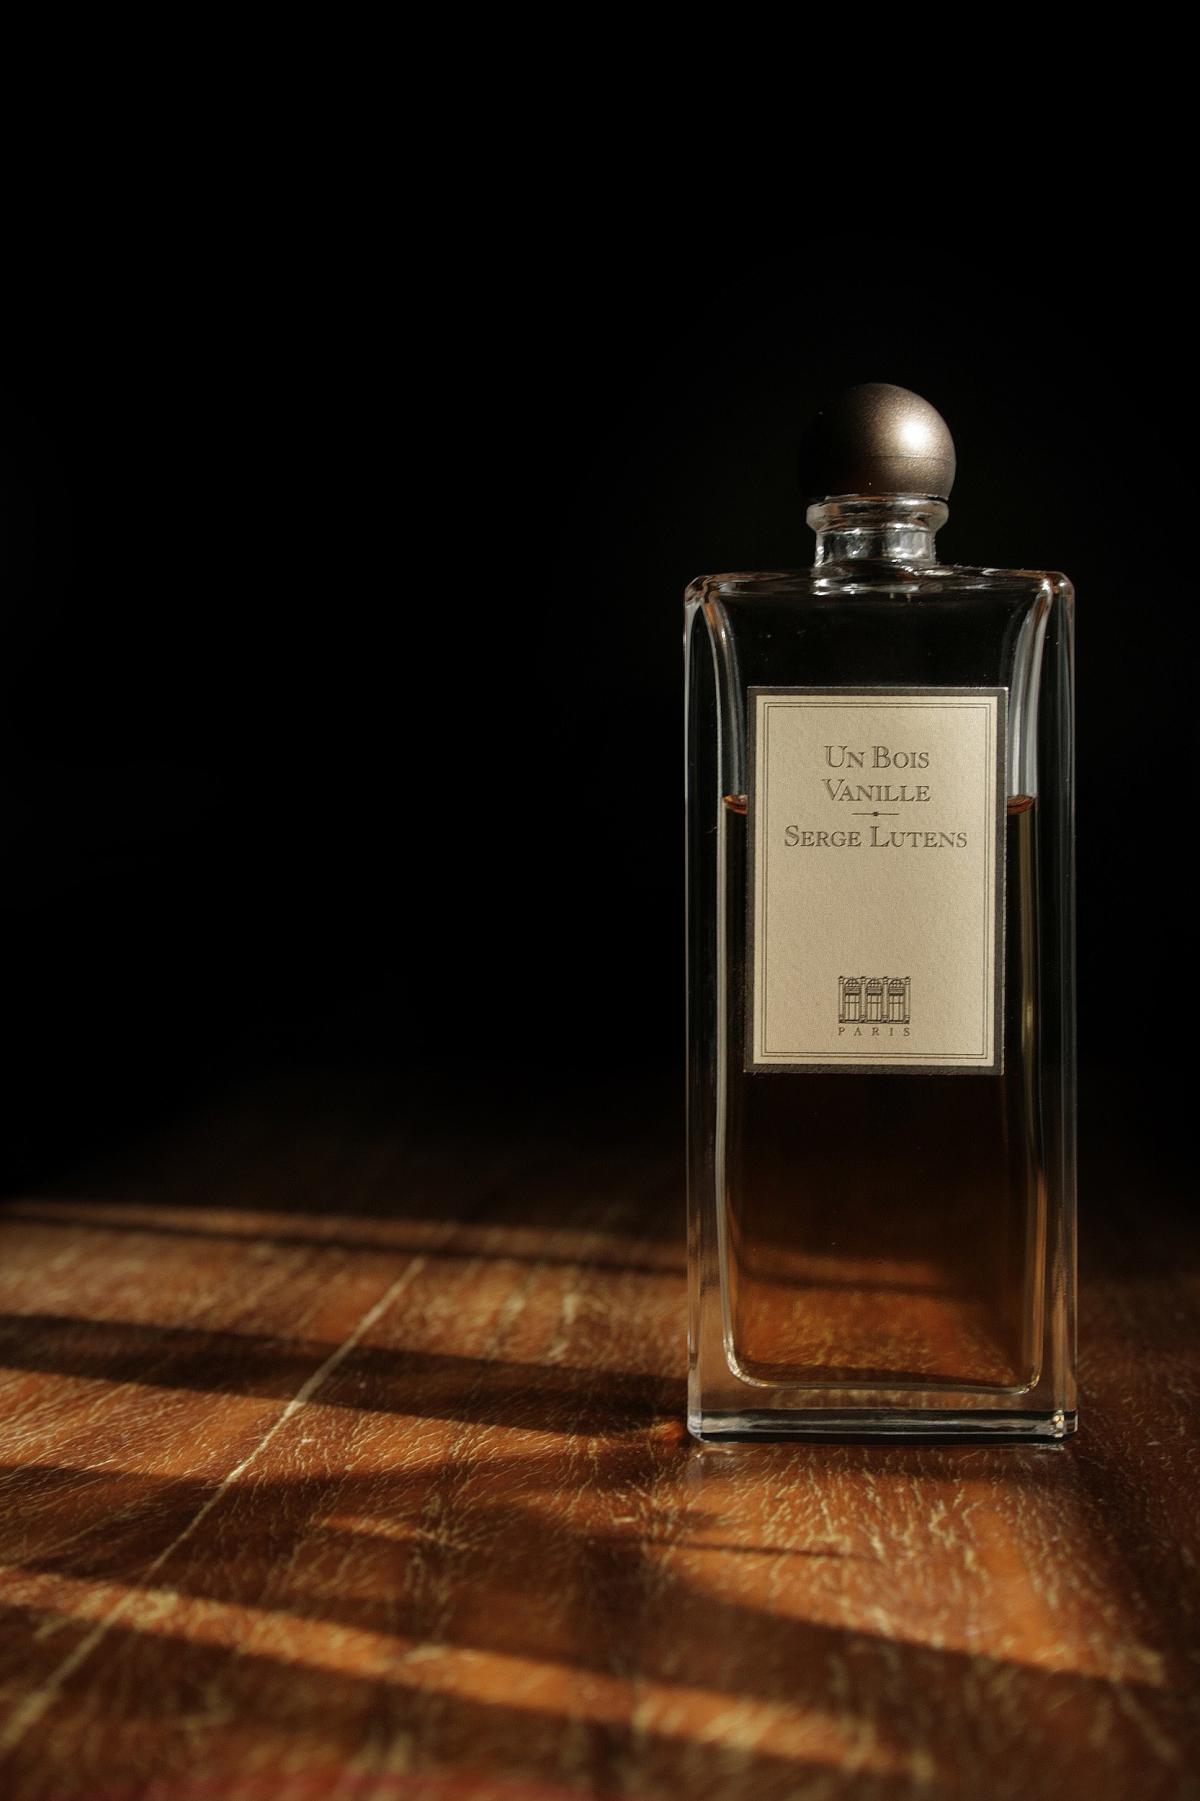 Un Bois Vanille Serge Lutens perfume - a fragrance for women and men 2003